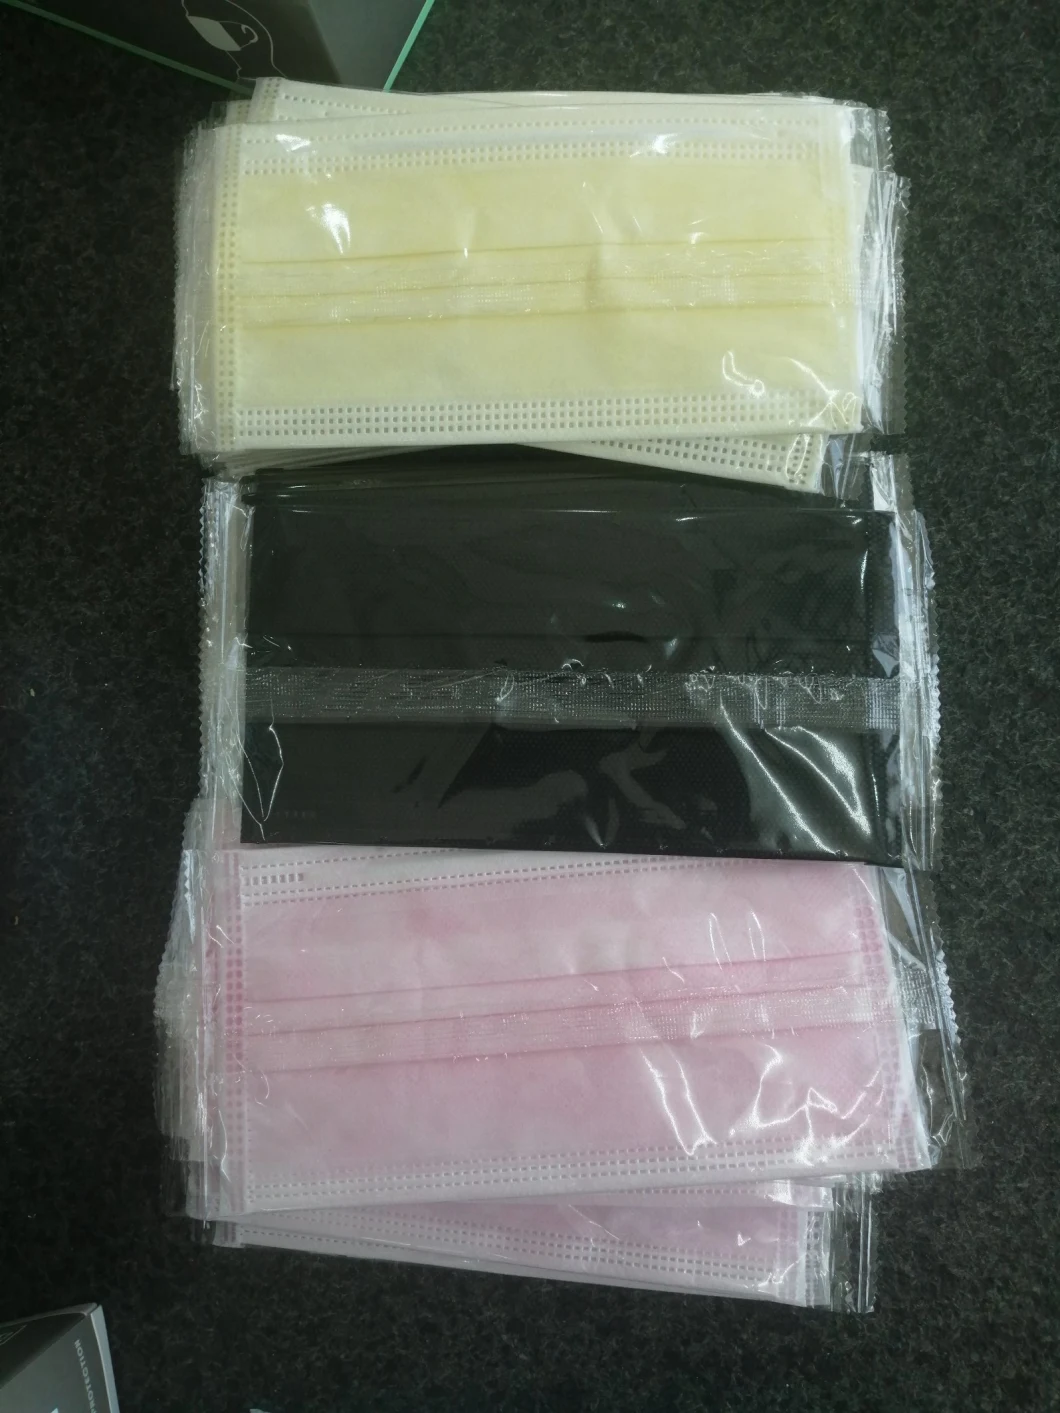 Medical Face Mask Disposable Individually Wrapped